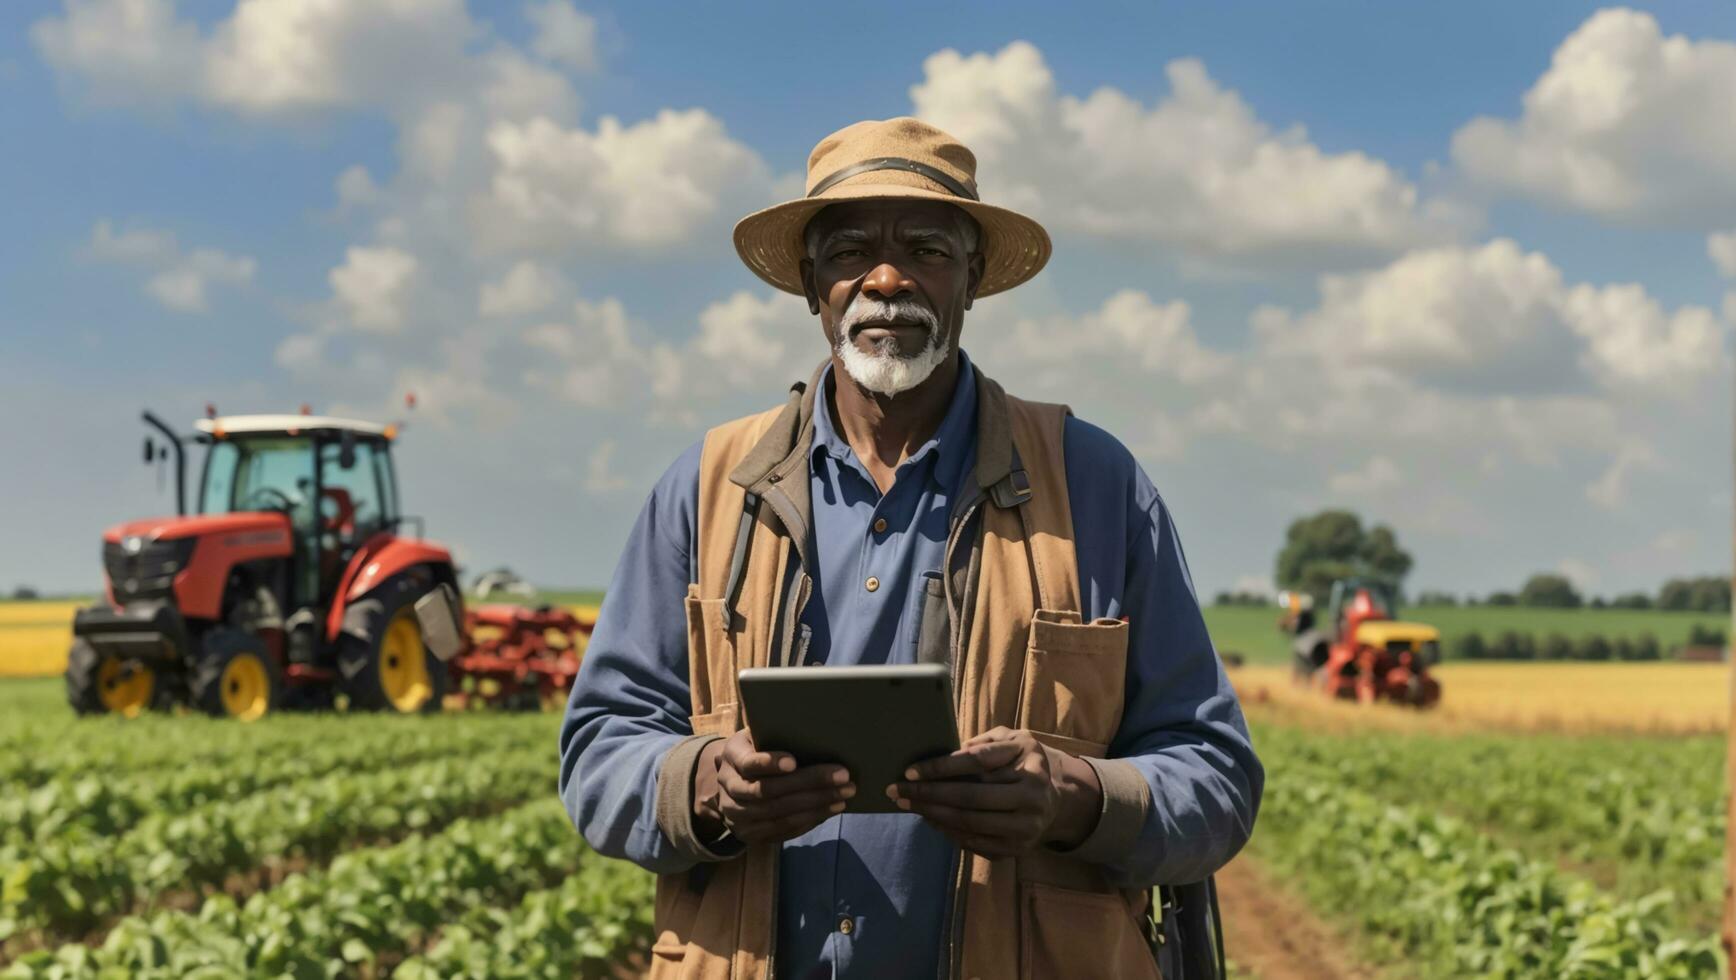 Illustration depicts an elder Black farmer standing confidently in the farmland, tablet in hand, bridging generations by embracing modern technology alongside traditional farming equipment. photo